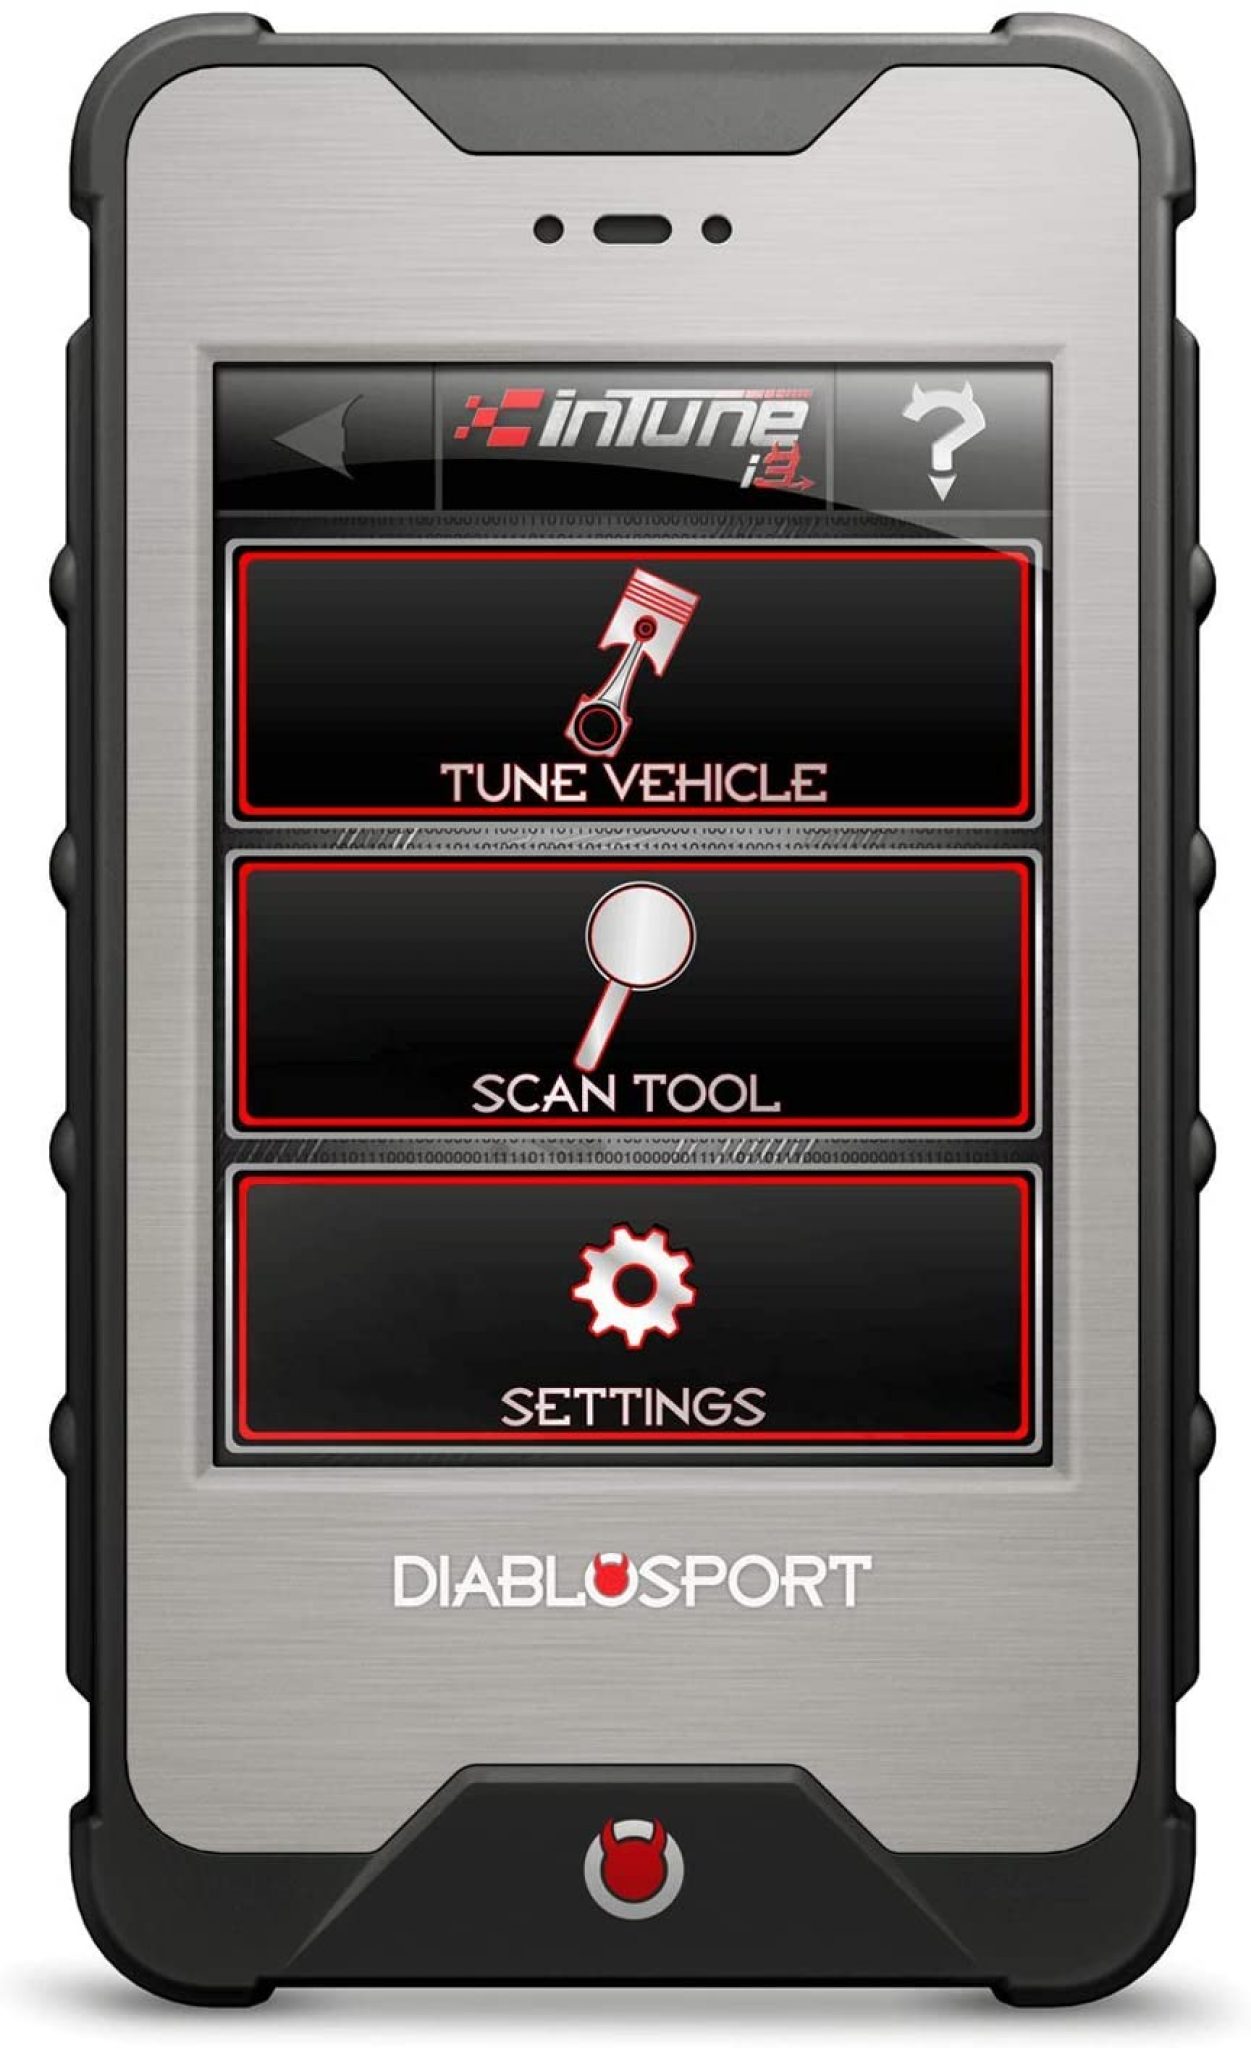 when does diablo sport come out w intune 4